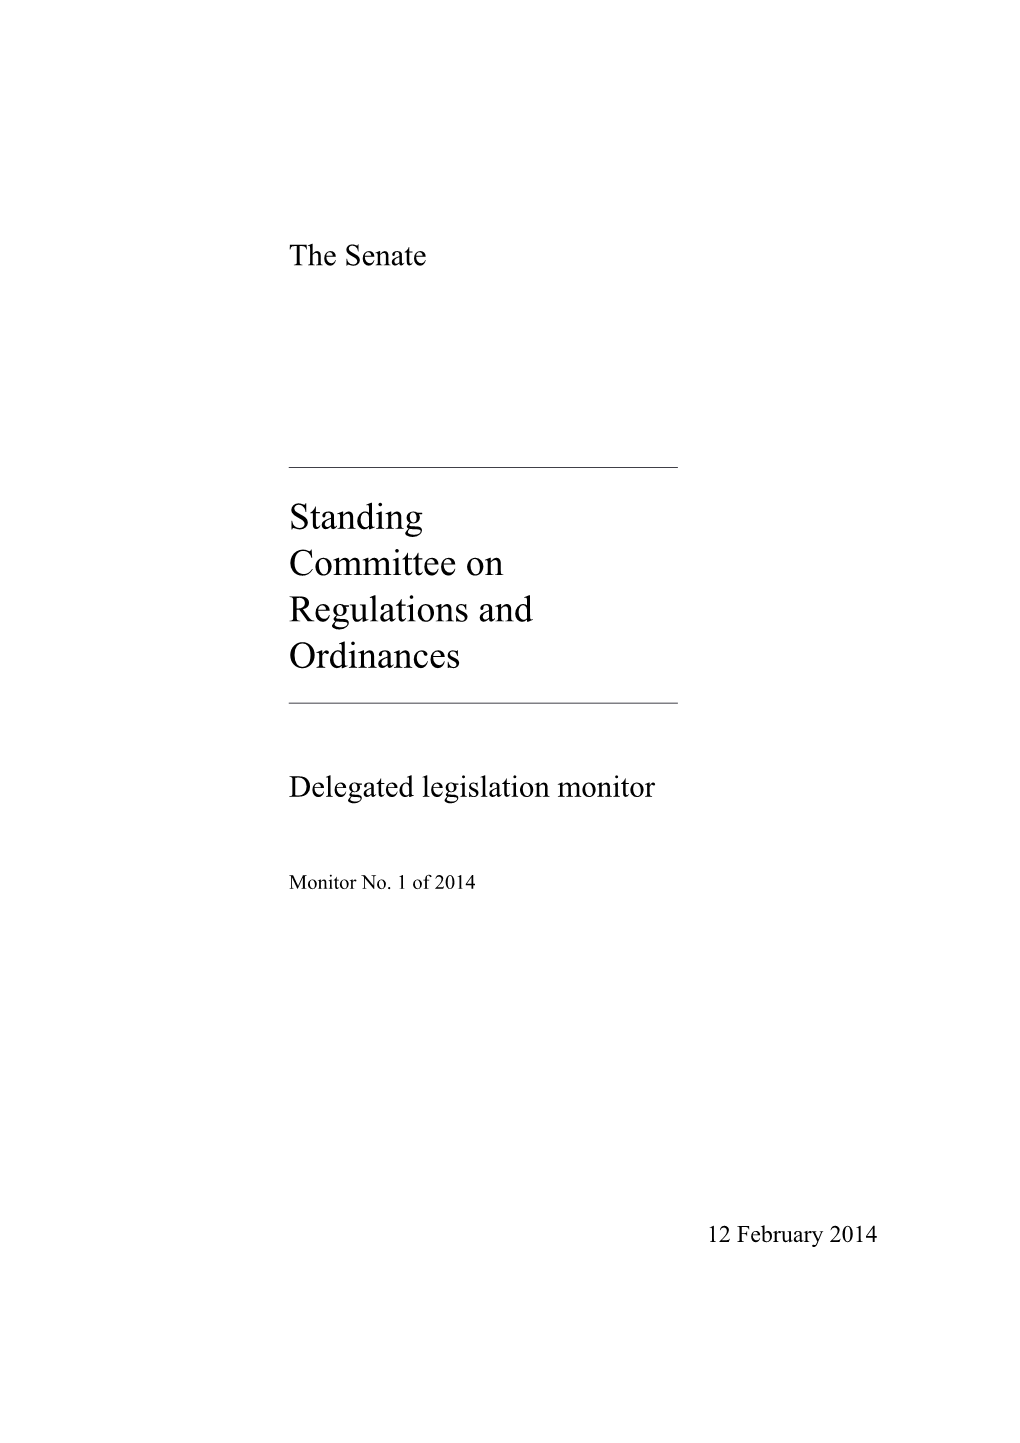 Committee on Regulations and Ordinances